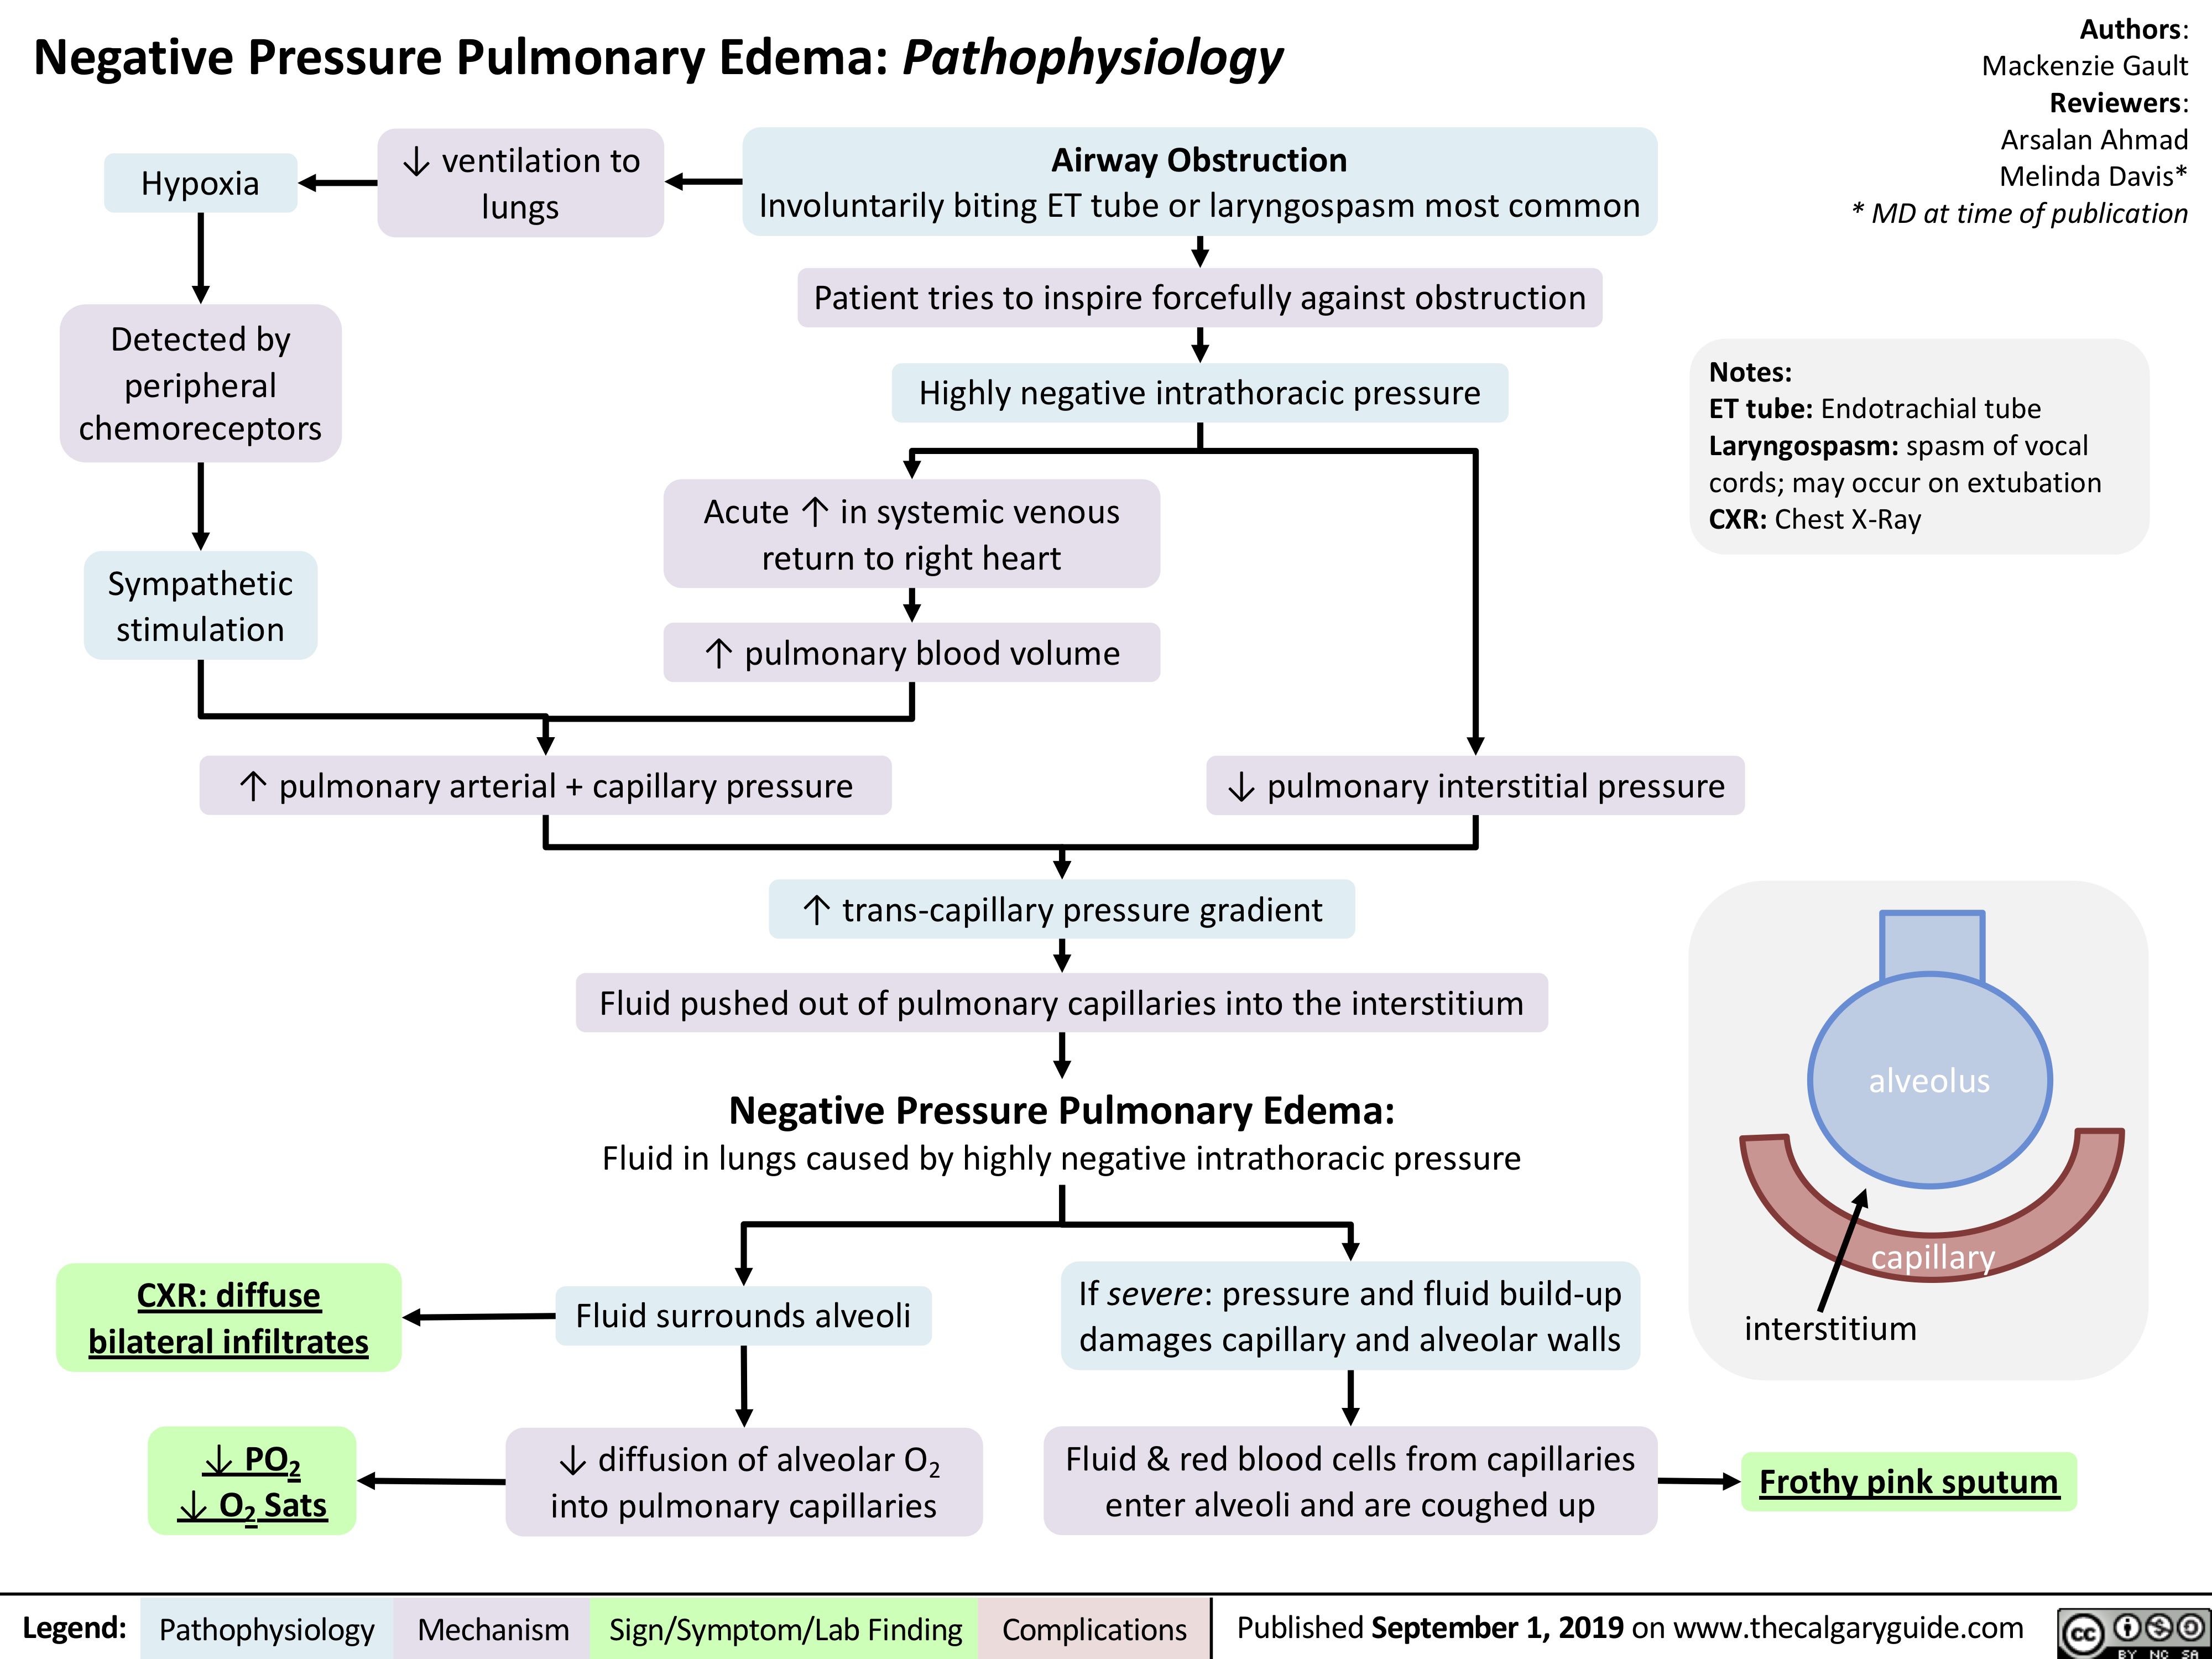 Negative Pressure Pulmonary Edema: Pathophysiology
Authors: Mackenzie Gault Reviewers: Arsalan Ahmad Melinda Davis* * MD at time of publication
Notes:
ET tube: Endotrachial tube Laryngospasm: spasm of vocal cords; may occur on extubation CXR: Chest X-Ray
   Hypoxia
Detected by peripheral chemoreceptors
Sympathetic stimulation
↓ ventilation to lungs
Airway Obstruction
Involuntarily biting ET tube or laryngospasm most common
Patient tries to inspire forcefully against obstruction
Highly negative intrathoracic pressure
Acute ↑ in systemic venous return to right heart
               ↑ pulmonary blood volume ↑ pulmonary arterial + capillary pressure
   ↓ pulmonary interstitial pressure ↑ trans-capillary pressure gradient
       Fluid pushed out of pulmonary capillaries into the interstitium
Negative Pressure Pulmonary Edema:
Fluid in lungs caused by highly negative intrathoracic pressure
alveolus capillary
interstitium
Frothy pink sputum
      CXR: diffuse bilateral infiltrates
↓ PO2 ↓ O2 Sats
Fluid surrounds alveoli
↓ diffusion of alveolar O2 into pulmonary capillaries
If severe: pressure and fluid build-up damages capillary and alveolar walls
Fluid & red blood cells from capillaries enter alveoli and are coughed up
                 Legend:
 Pathophysiology
 Mechanism
Sign/Symptom/Lab Finding
  Complications
Published September 1, 2019 on www.thecalgaryguide.com
   